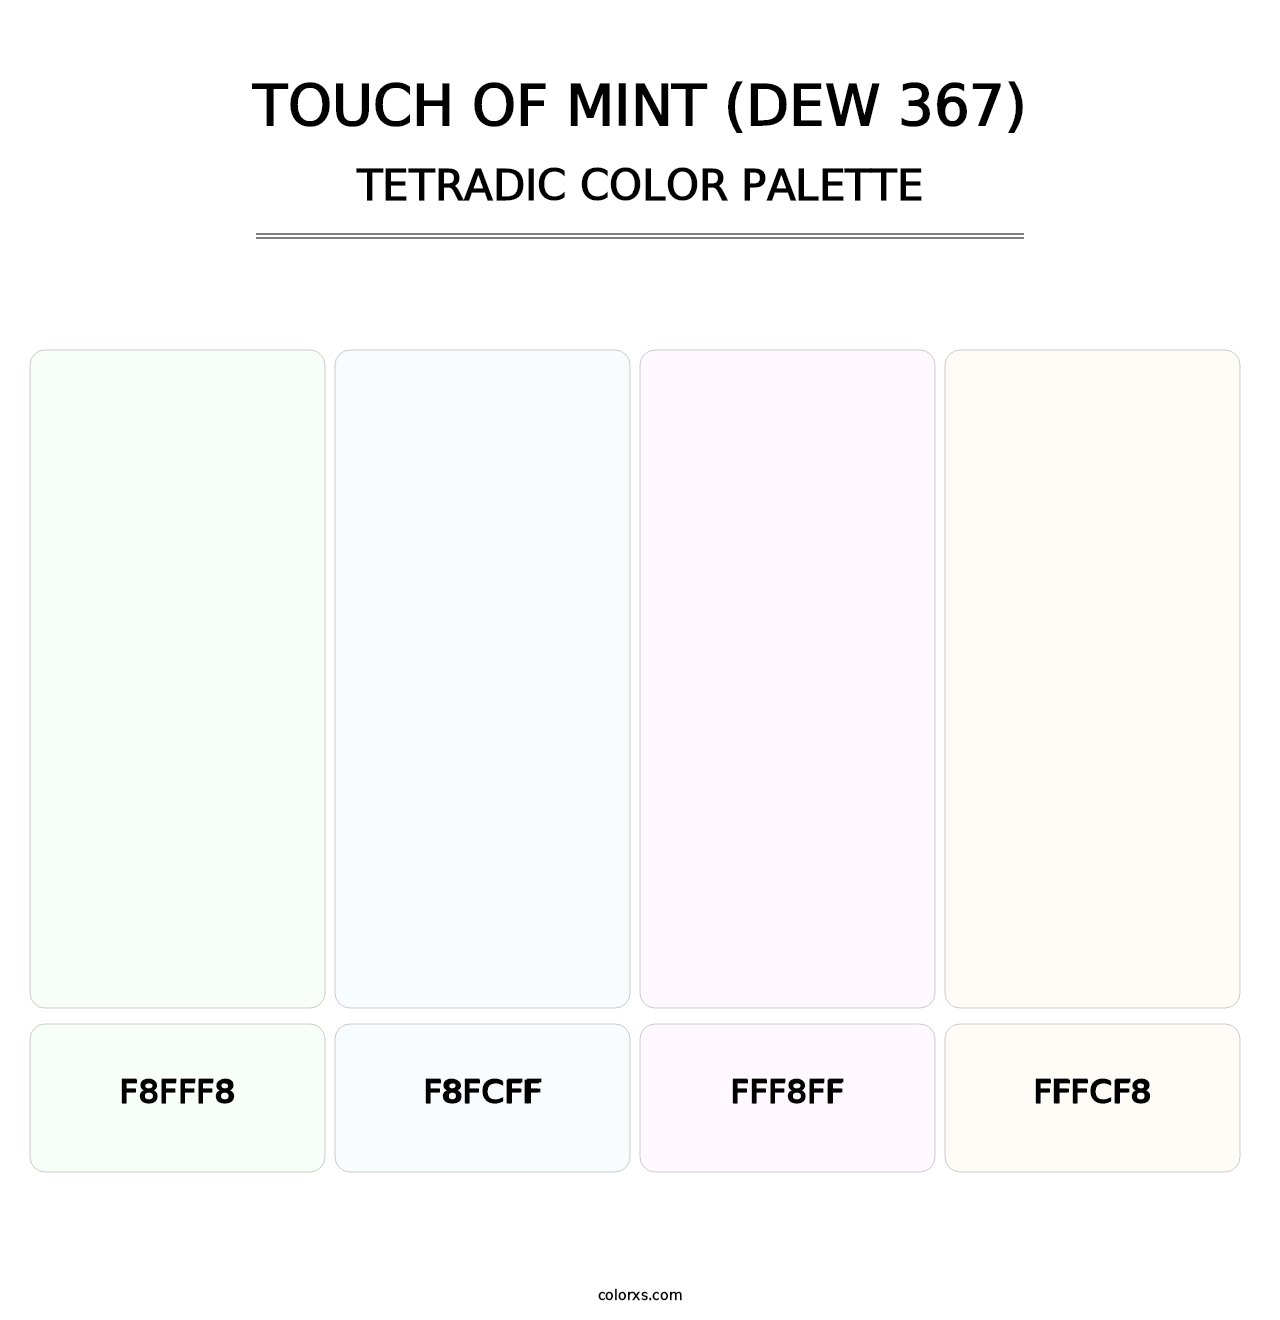 Touch of Mint (DEW 367) - Tetradic Color Palette